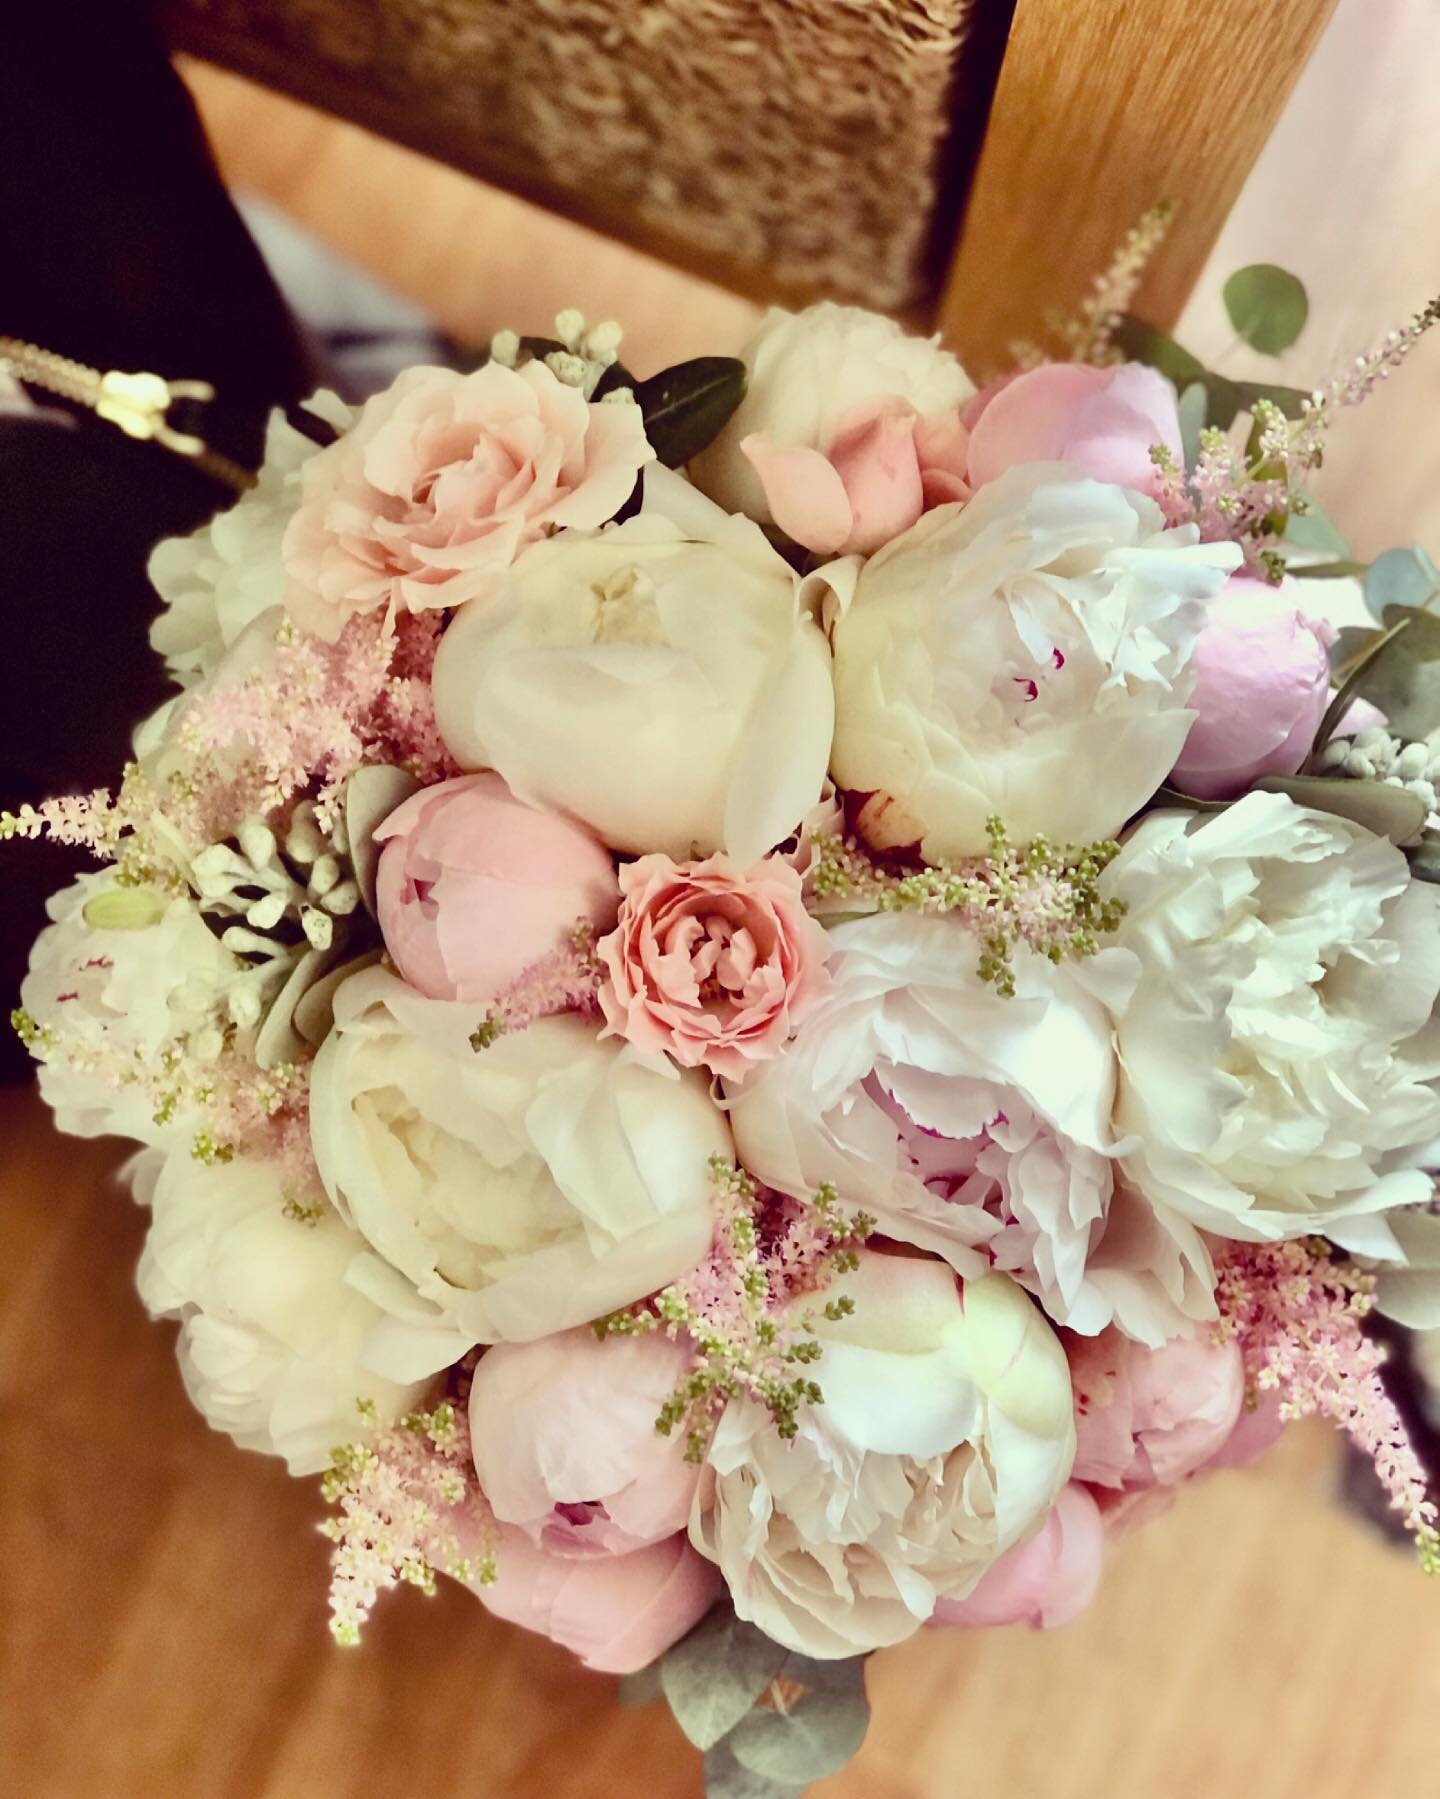 Lush ivory and pink peonies &amp; roses bridal bouquet 💕 I love peony season! ⭐️